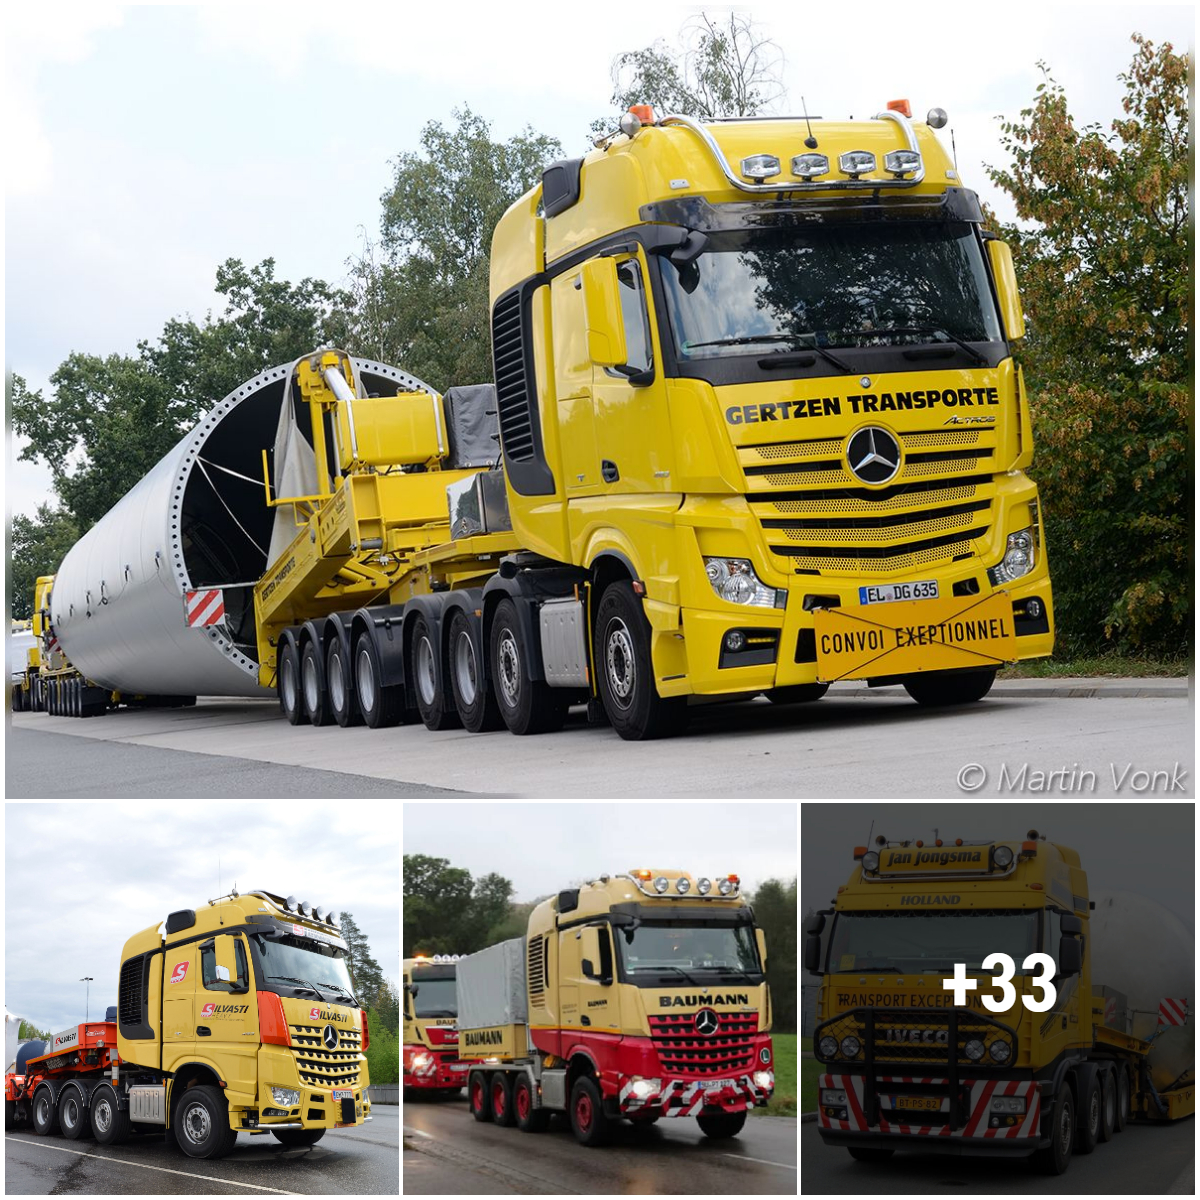 Baumann Heavy Transport’s five large trucks traverse the German landscape conquering the pinnacle of the oversized cargo movement.